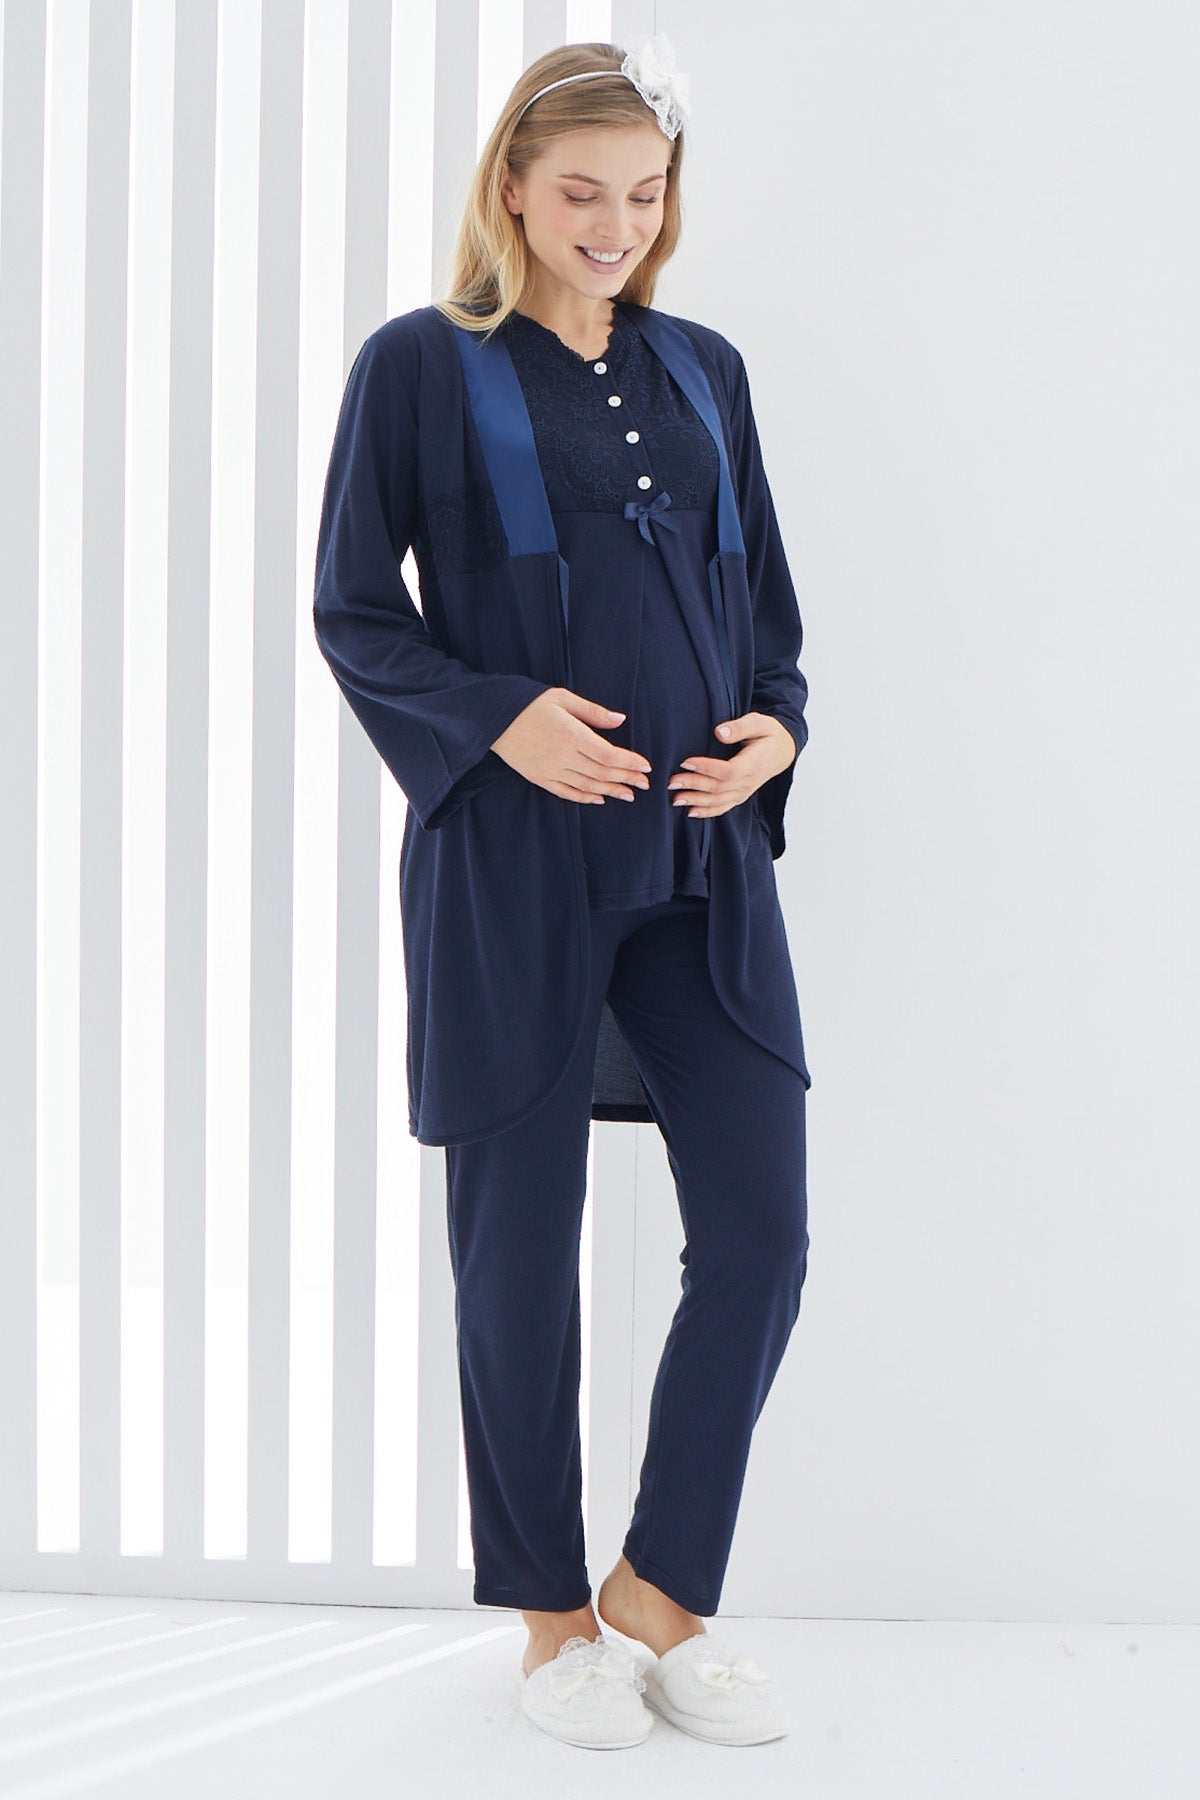 Shopymommy 3410 Lace Collar 3-Pieces Maternity & Nursing Pajamas With Robe Navy Blue